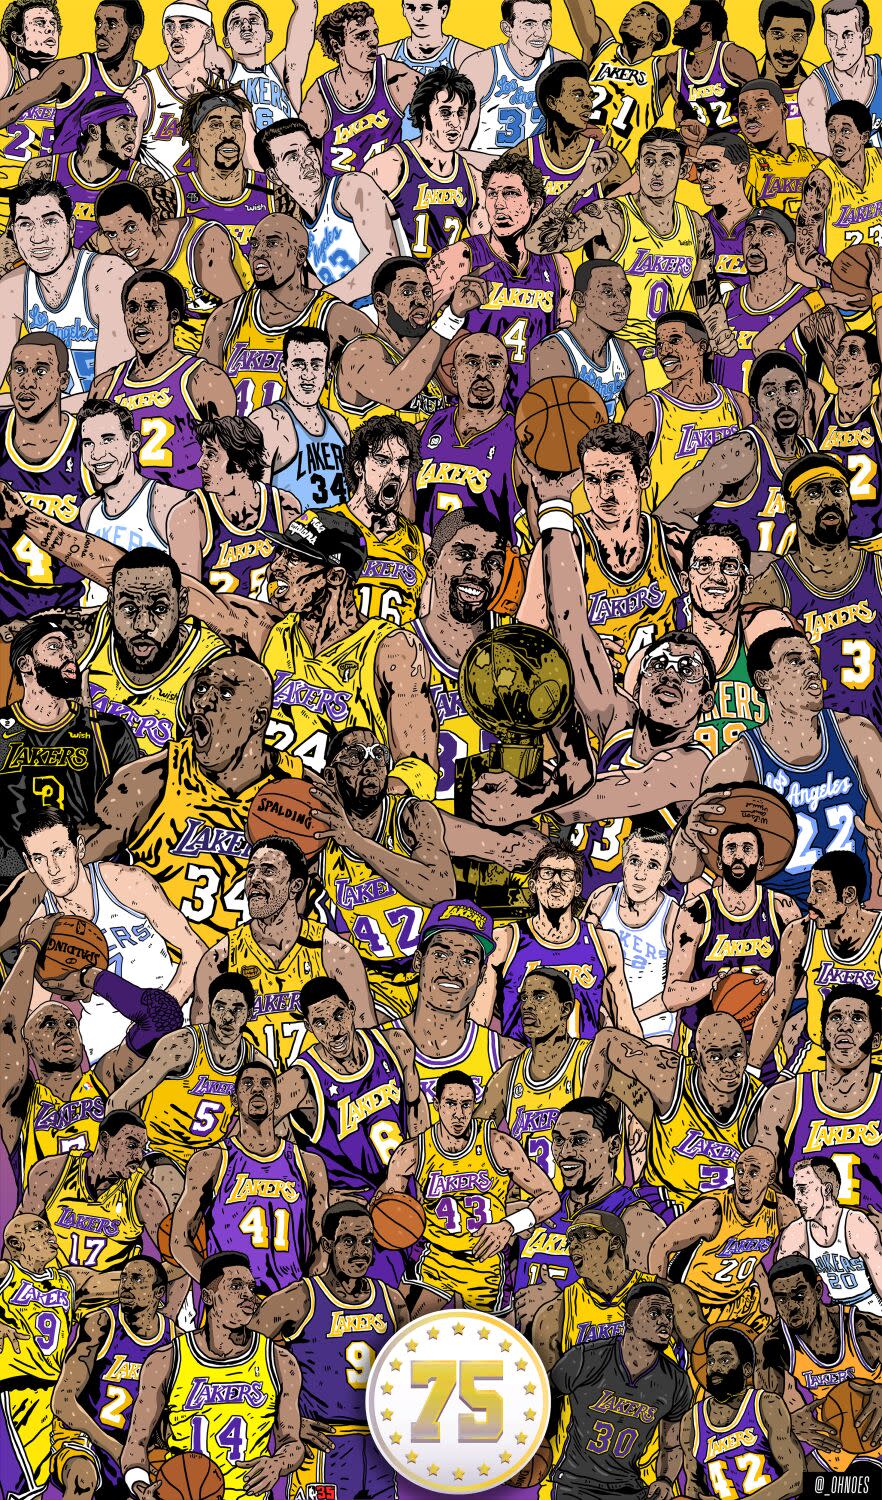 An illustrated collage of The Times' 75 greatest Lakers players.